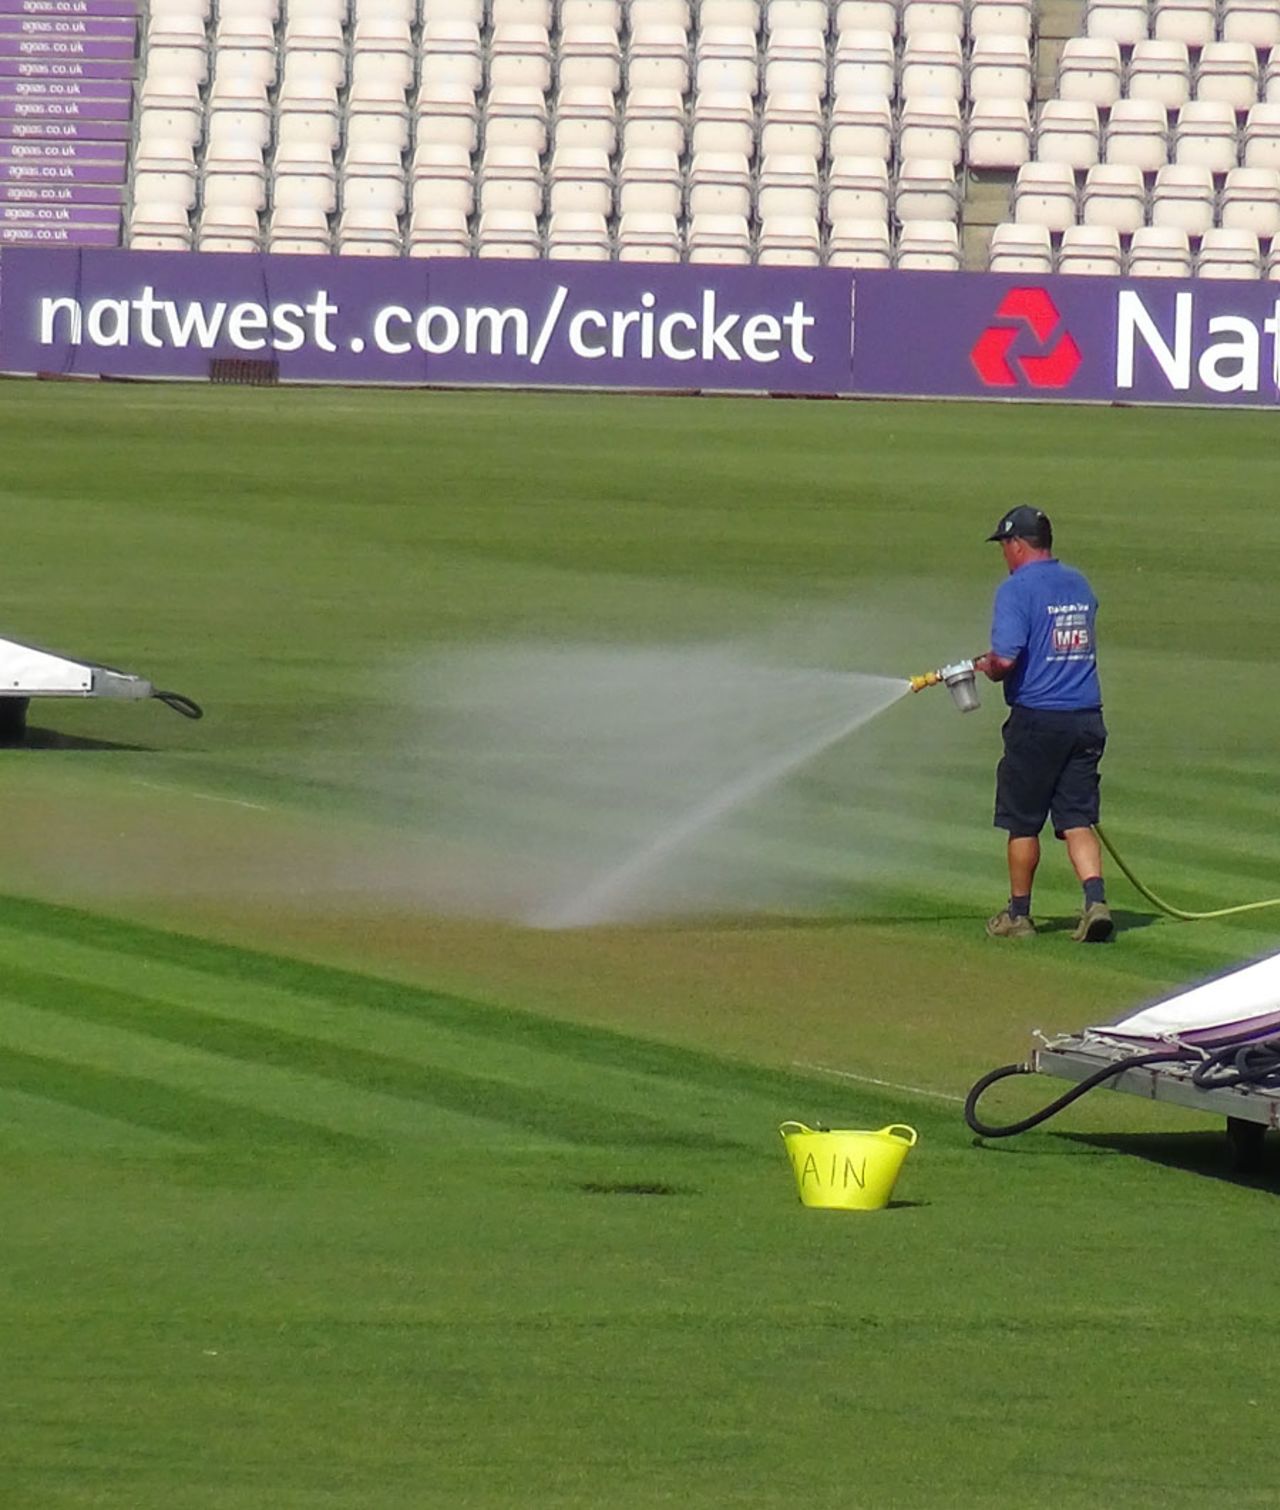 The Ageas Bowl ground staff are batting hot weather ahead of the third Test, Ageas Bowl, July 24, 2014